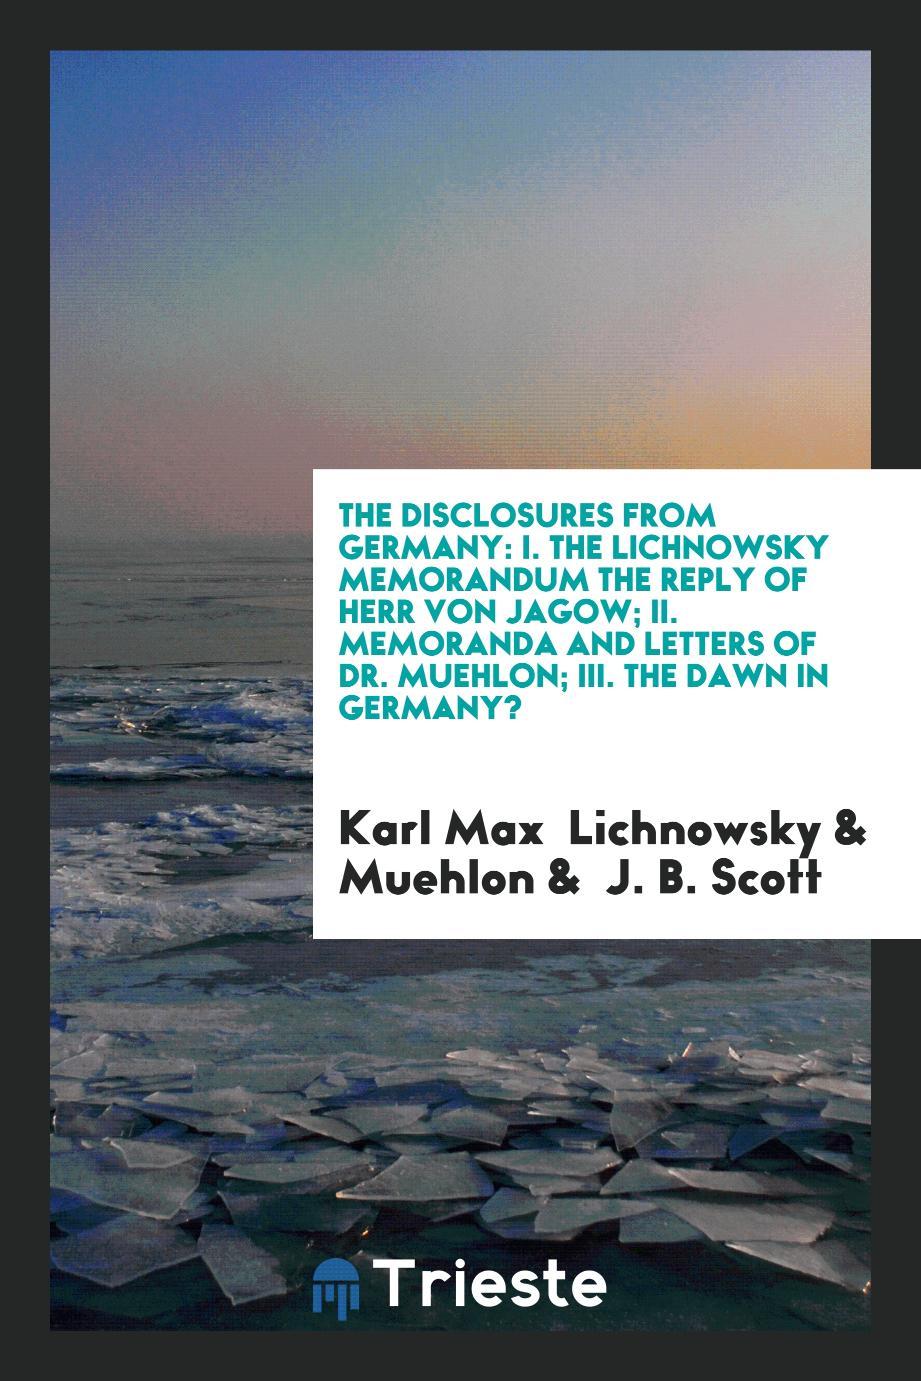 Karl Max  Lichnowsky, Muehlon, J. B. Scott - The Disclosures from Germany: I. The Lichnowsky Memorandum the Reply of Herr von Jagow; II. Memoranda and Letters of Dr. Muehlon; III. The Dawn in Germany?